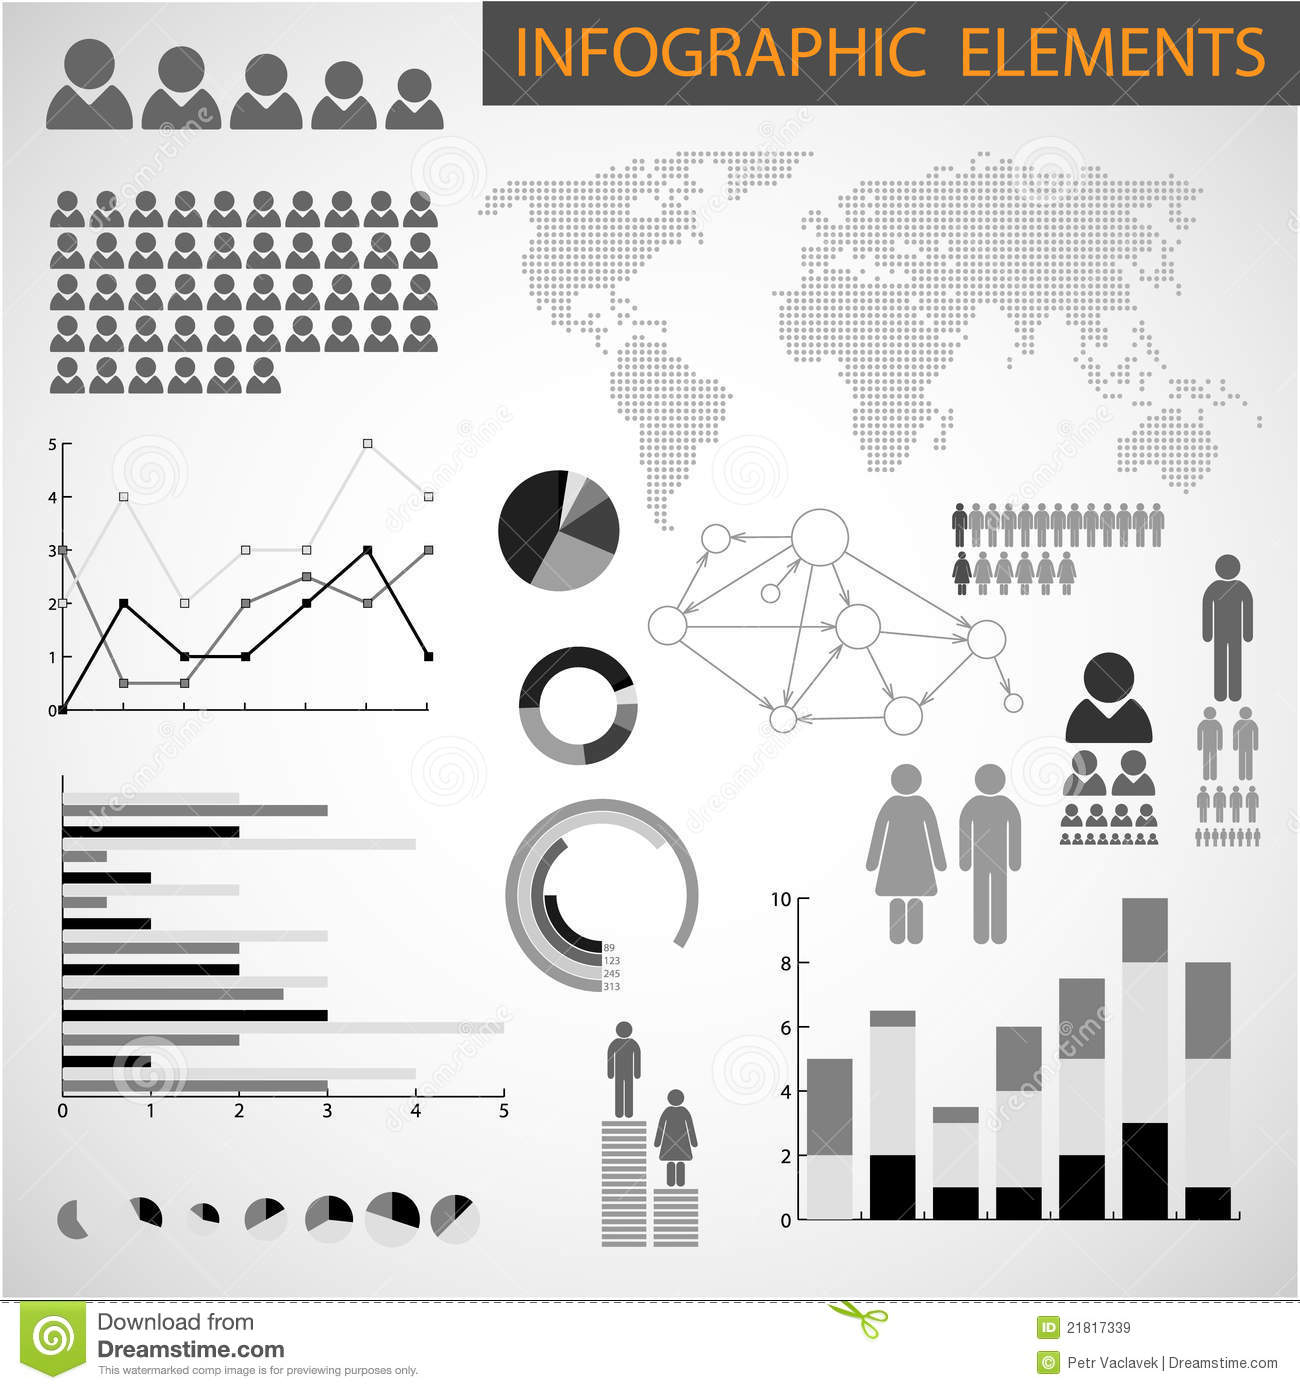 Black And White Infographic Set Stock Illustration - Download Image Now - iStock